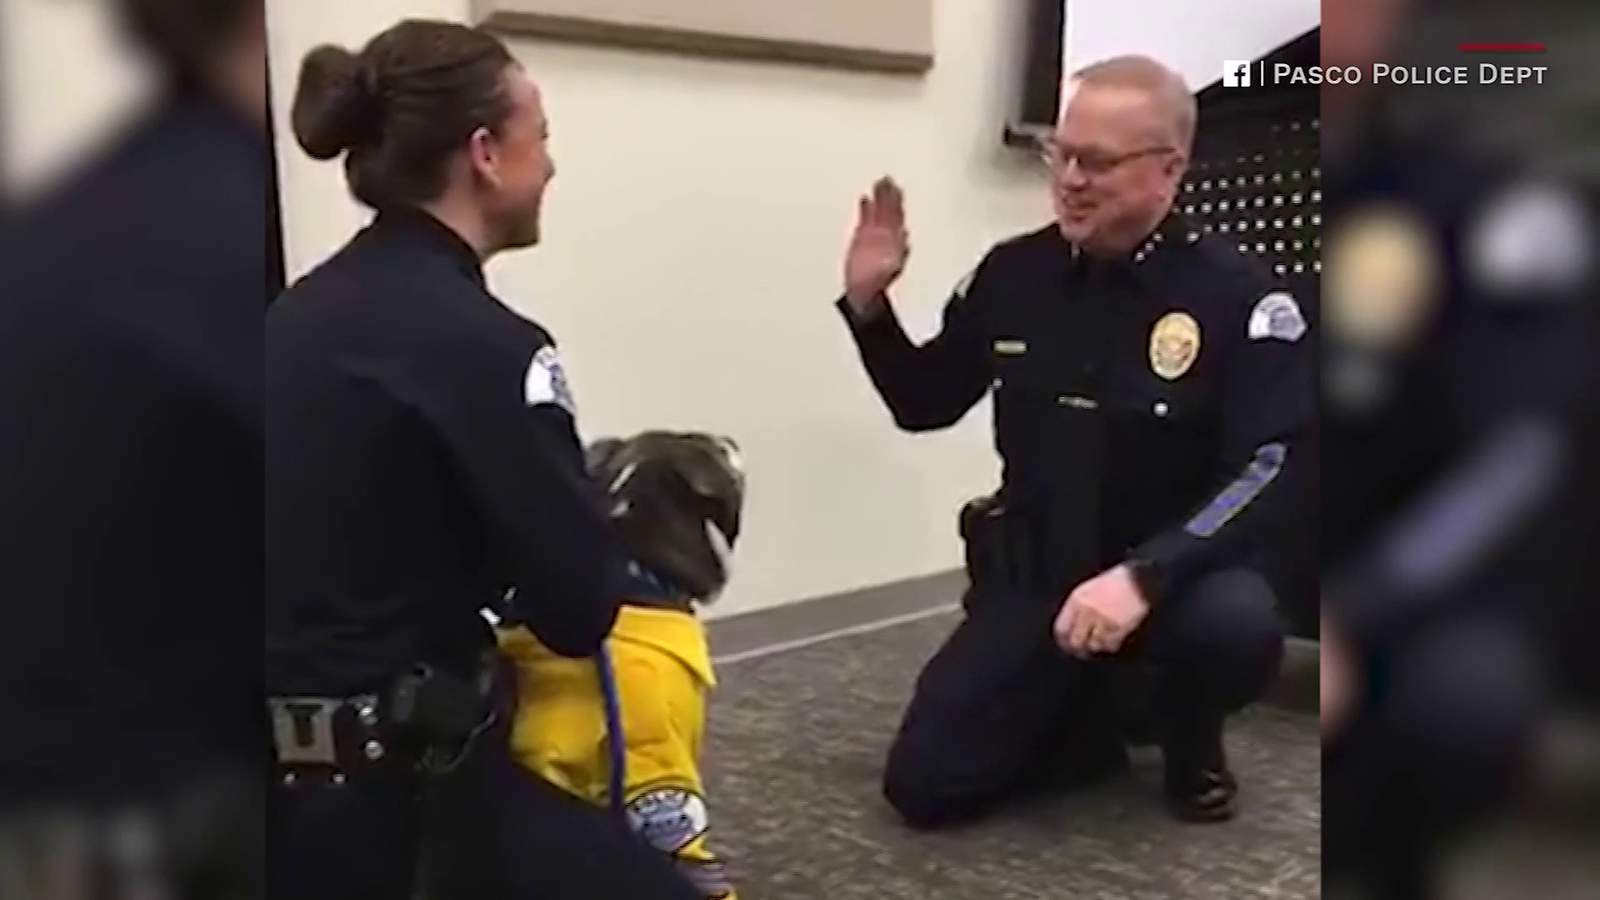 A terminally ill rescue dog became a police K-9 for a day